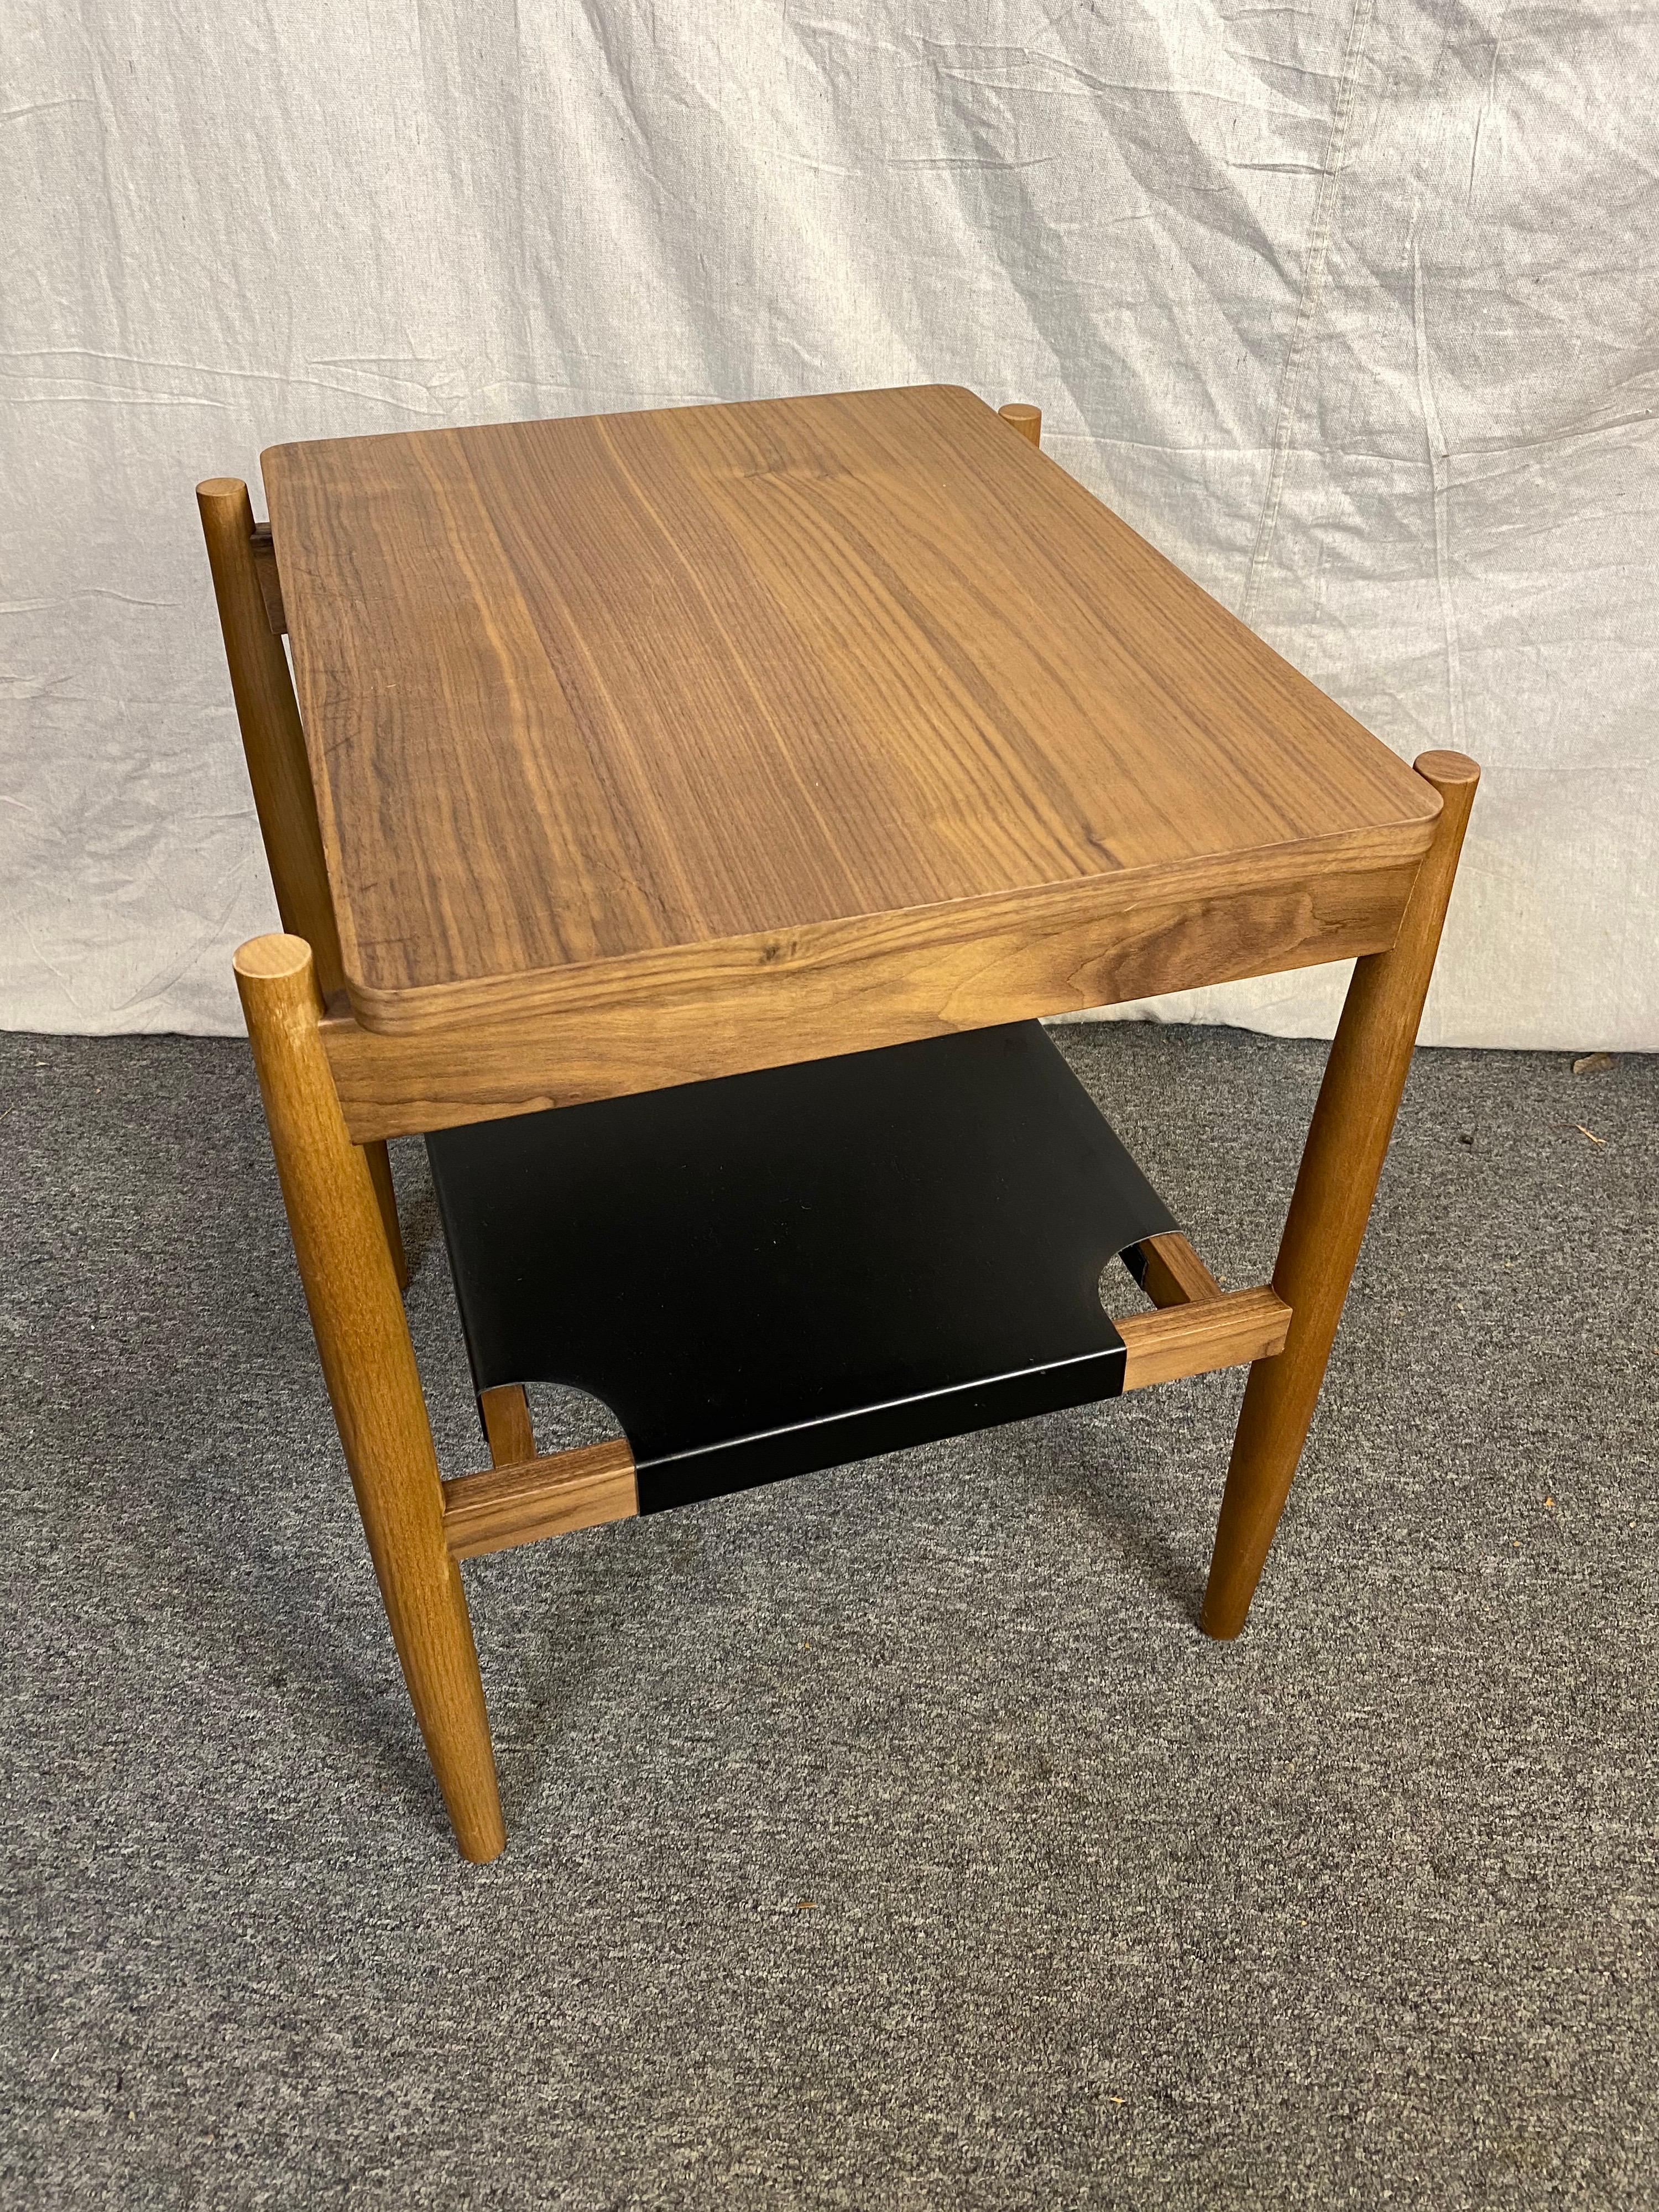 Jens Risom side table with a black leather stretched lower shelf. Table is just a few years old and out of Production. Overall in nice shape, top on very close examination shows fine scratches to top surface.